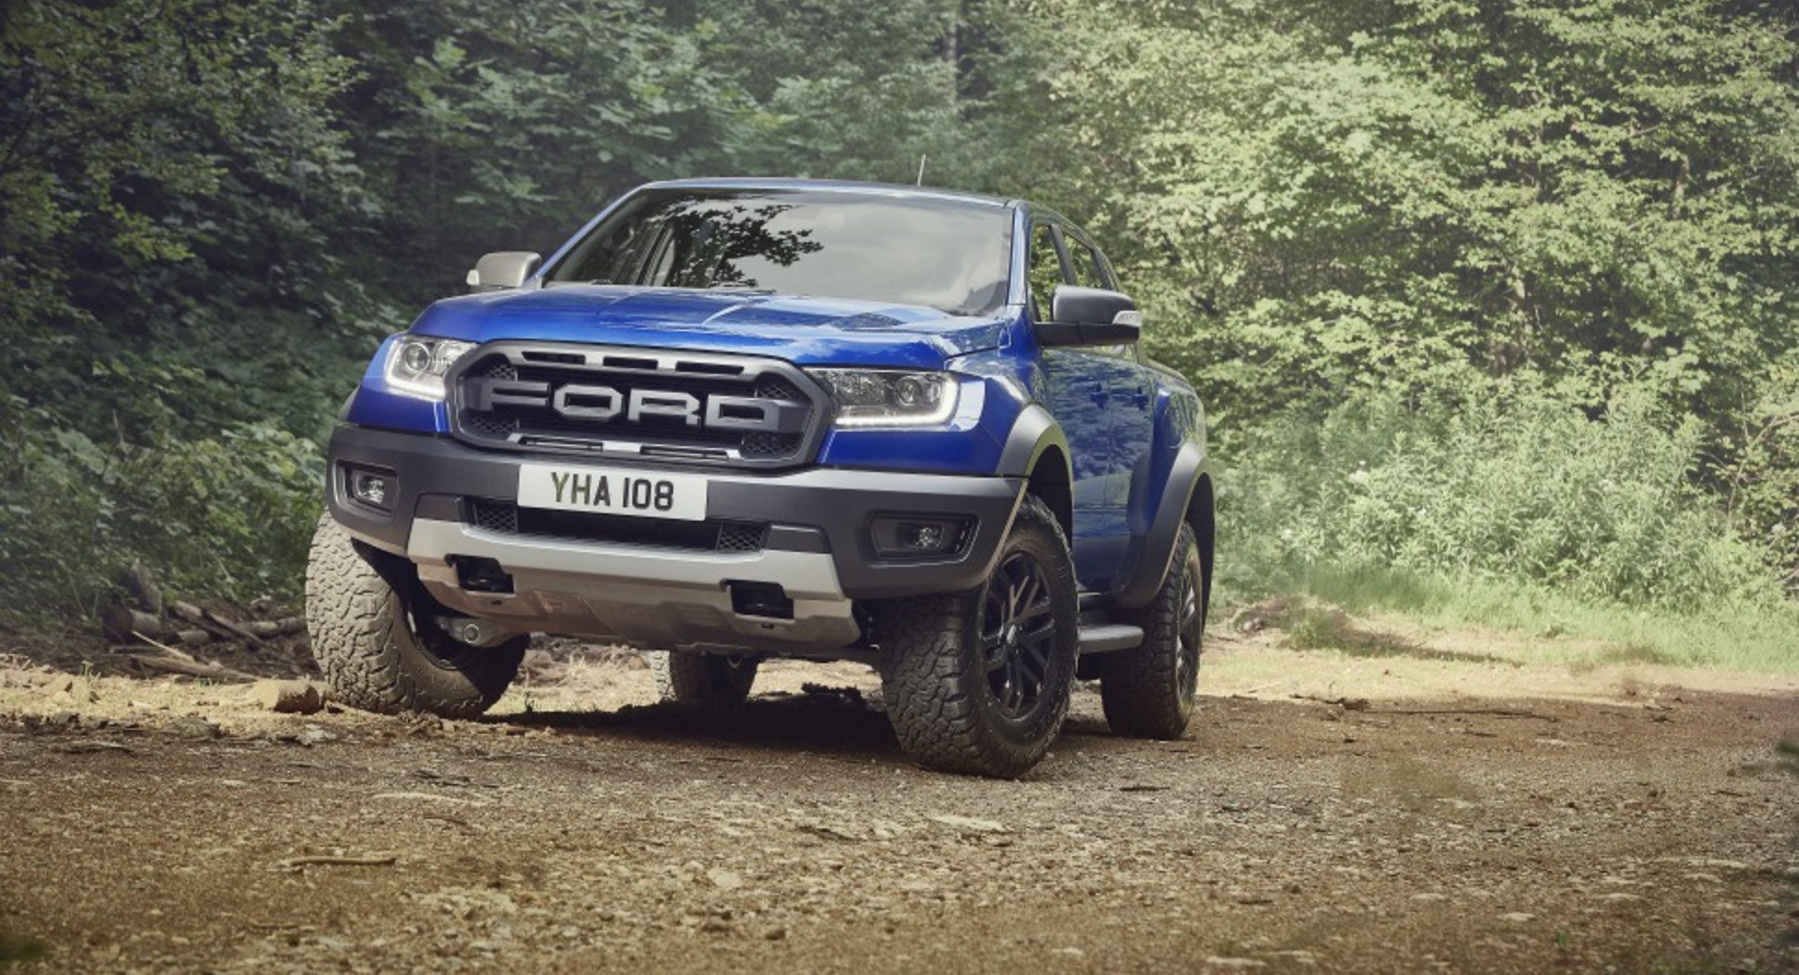 Ford Ranger IV Raptor (Americas) 2.0d (214 Hp) Automatic 2019, 2020, 2021 